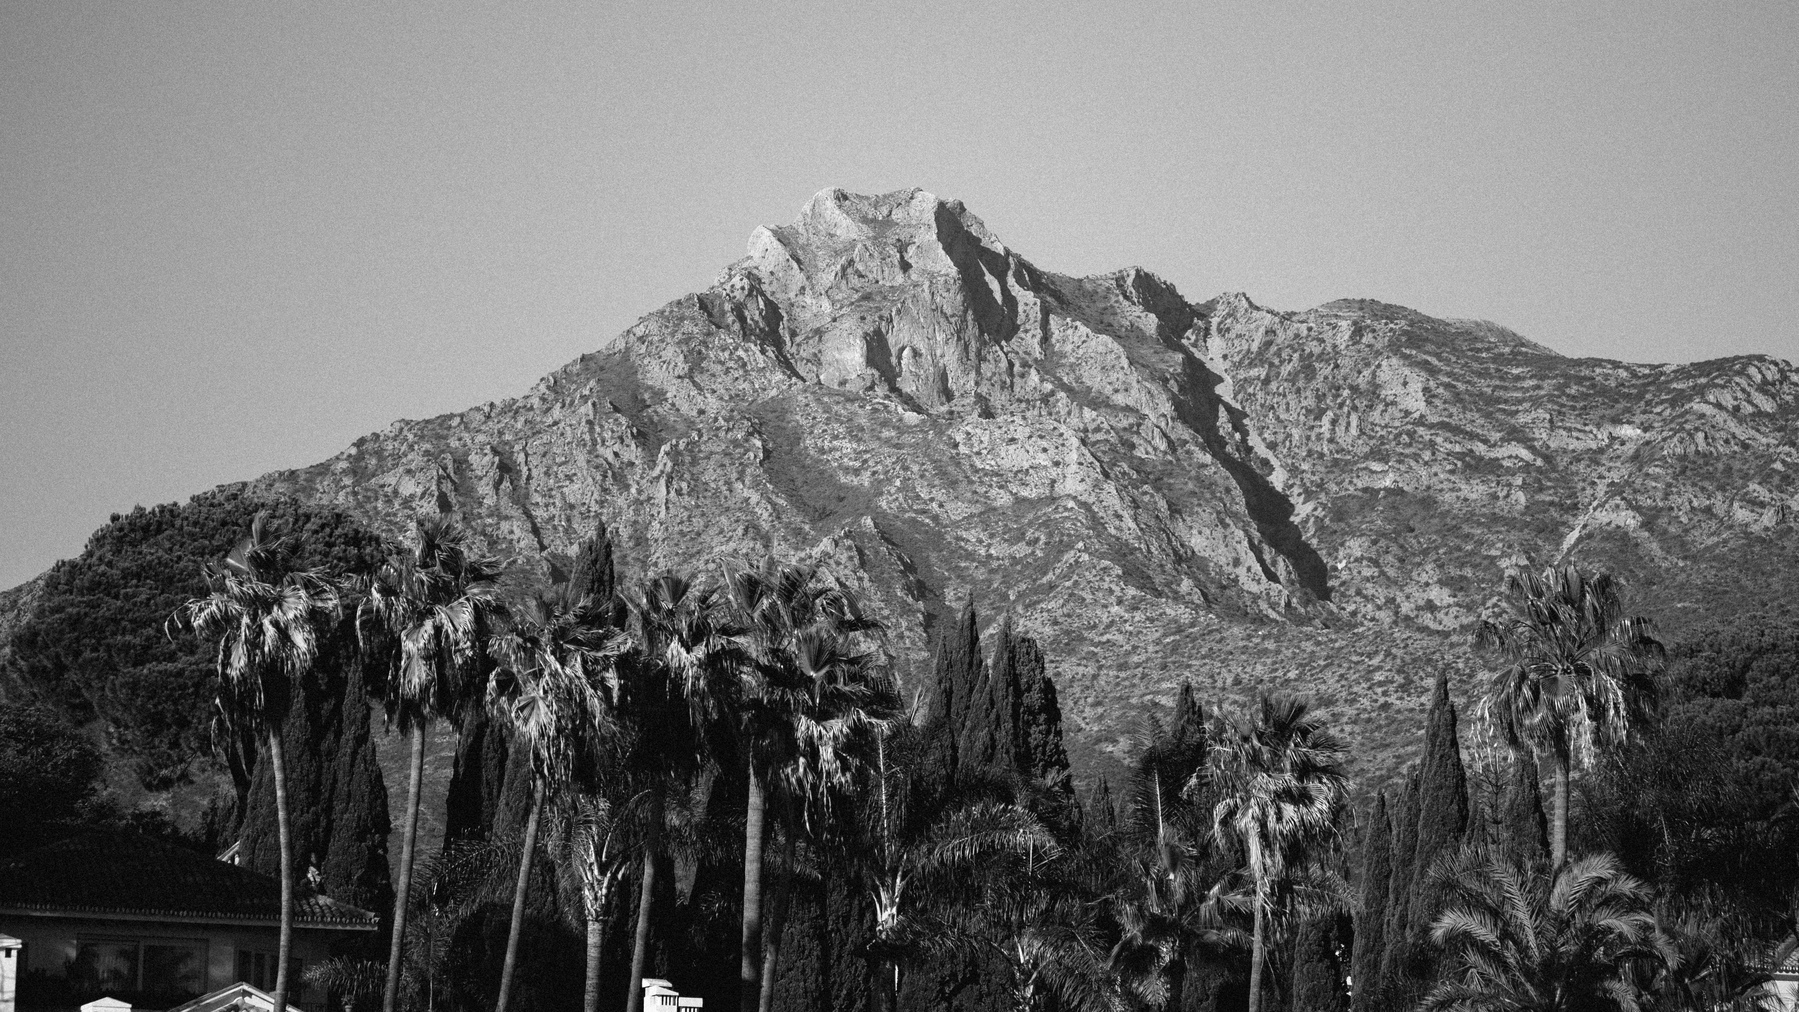 A black and white photo of a mountain behind a line of palm trees. The mountain has a deep texture in the rock due to harsh direct light. 